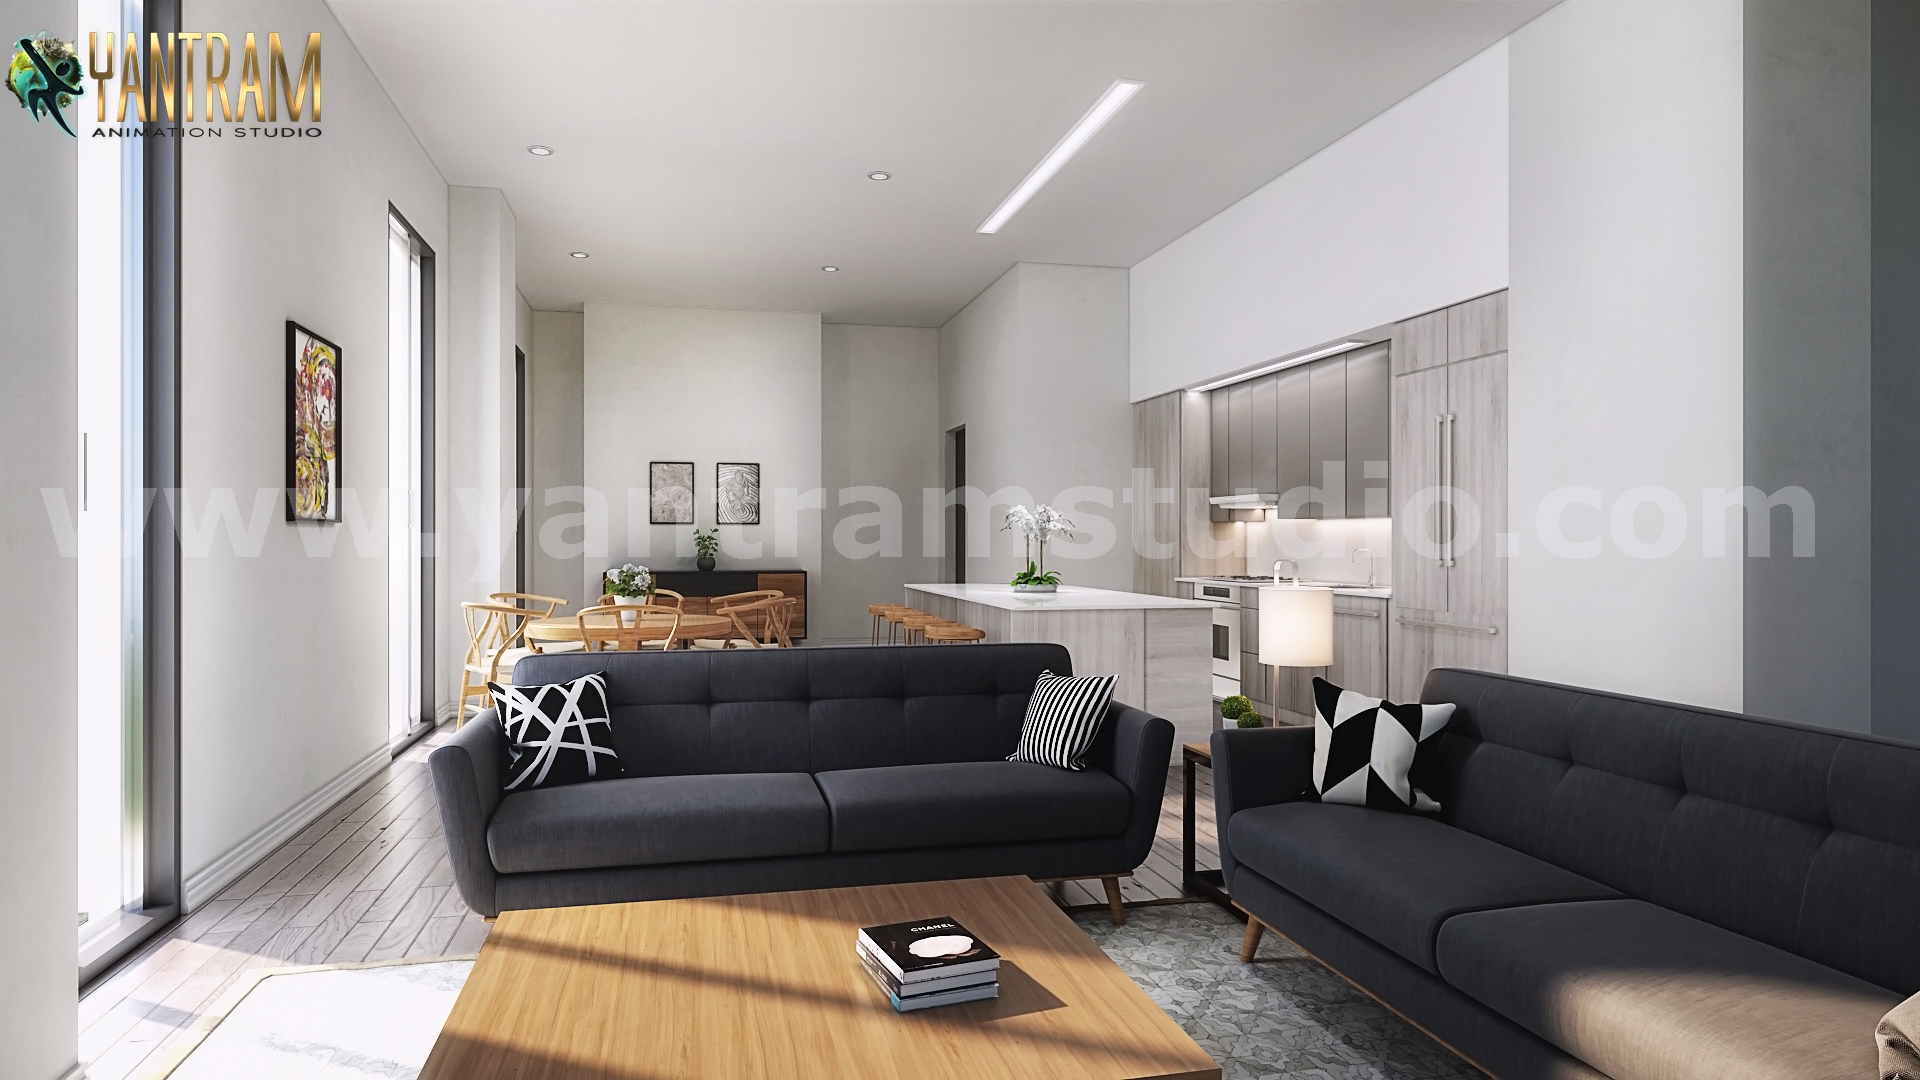 Small_living_room_and_kitchen_interior_design_rendering_by_architectural_modeling_firms.jpg -  by Yantramarchitecturaldesignstudio